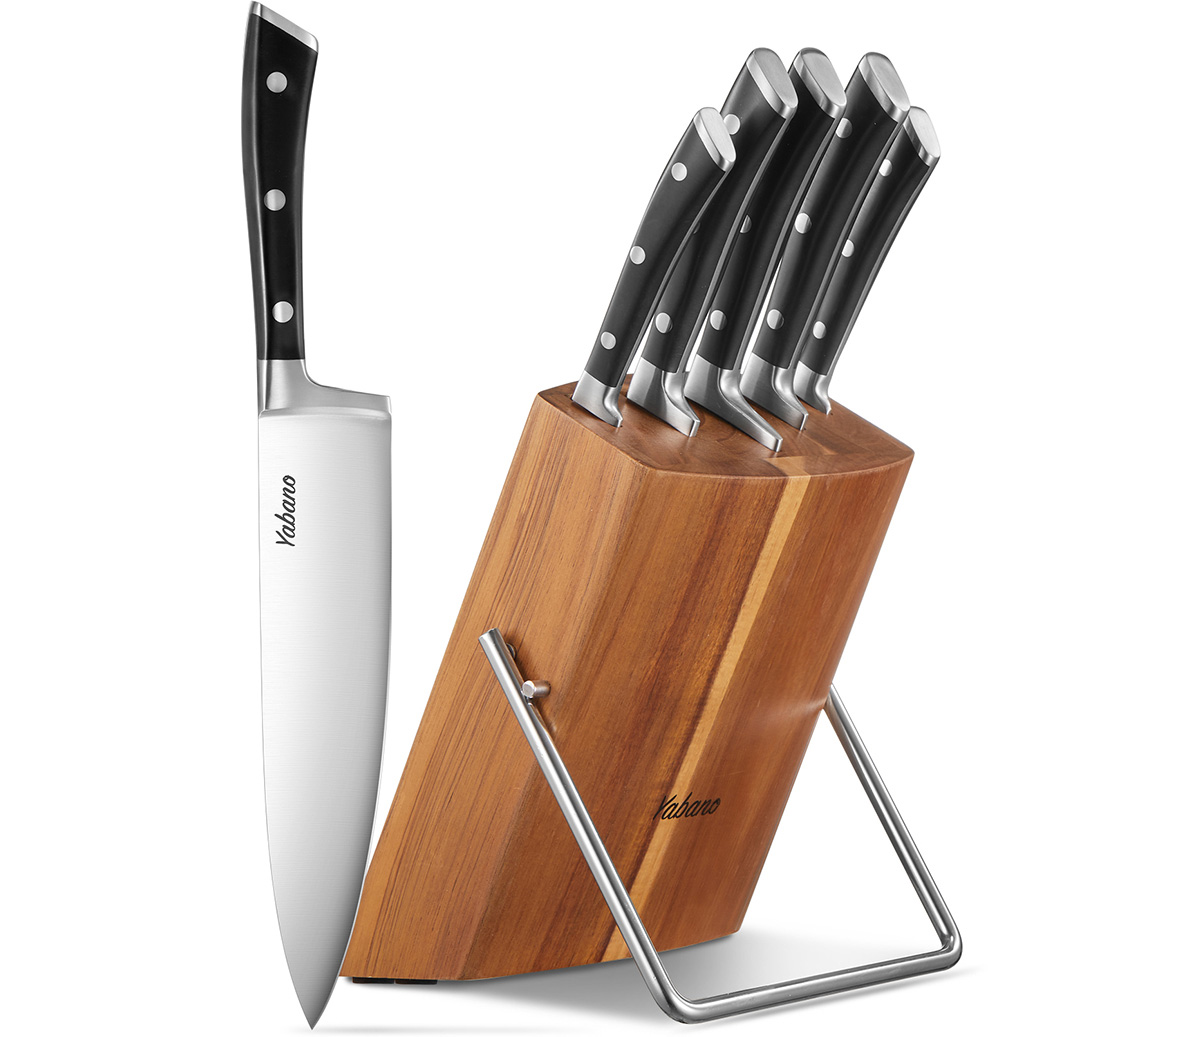 Knife Set, Yabano 6-Piece Kitchen Knife Set with Wooden Block Professional German High Carbon Stainless Steel Cutlery Knife Block Set